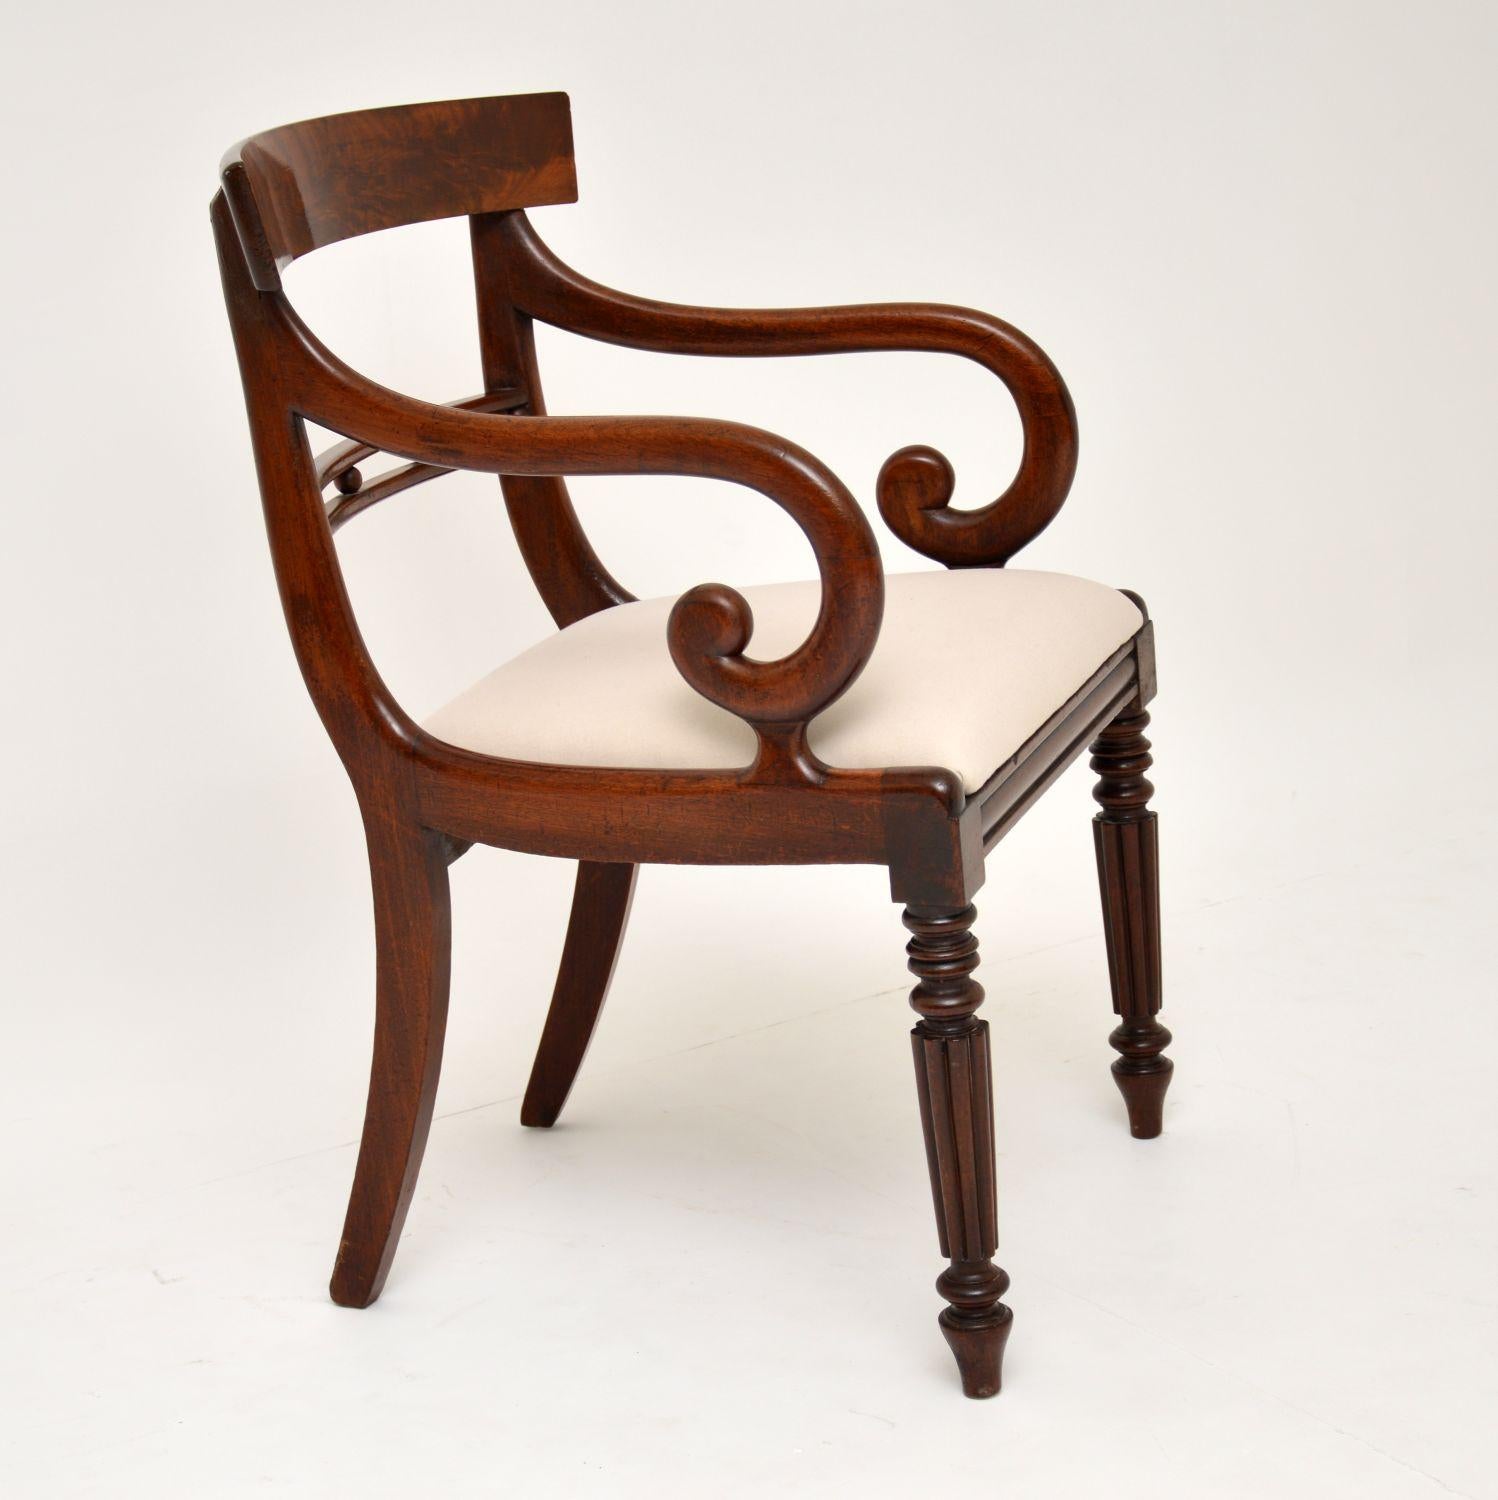 Antique Regency mahogany armchair, with would be ideal for use as a desk chair. It dates from circa 1820s-1830s period and is in excellent condition. It has a flame mahogany curved back, a double rail with circular balls in-between, scroll over arms